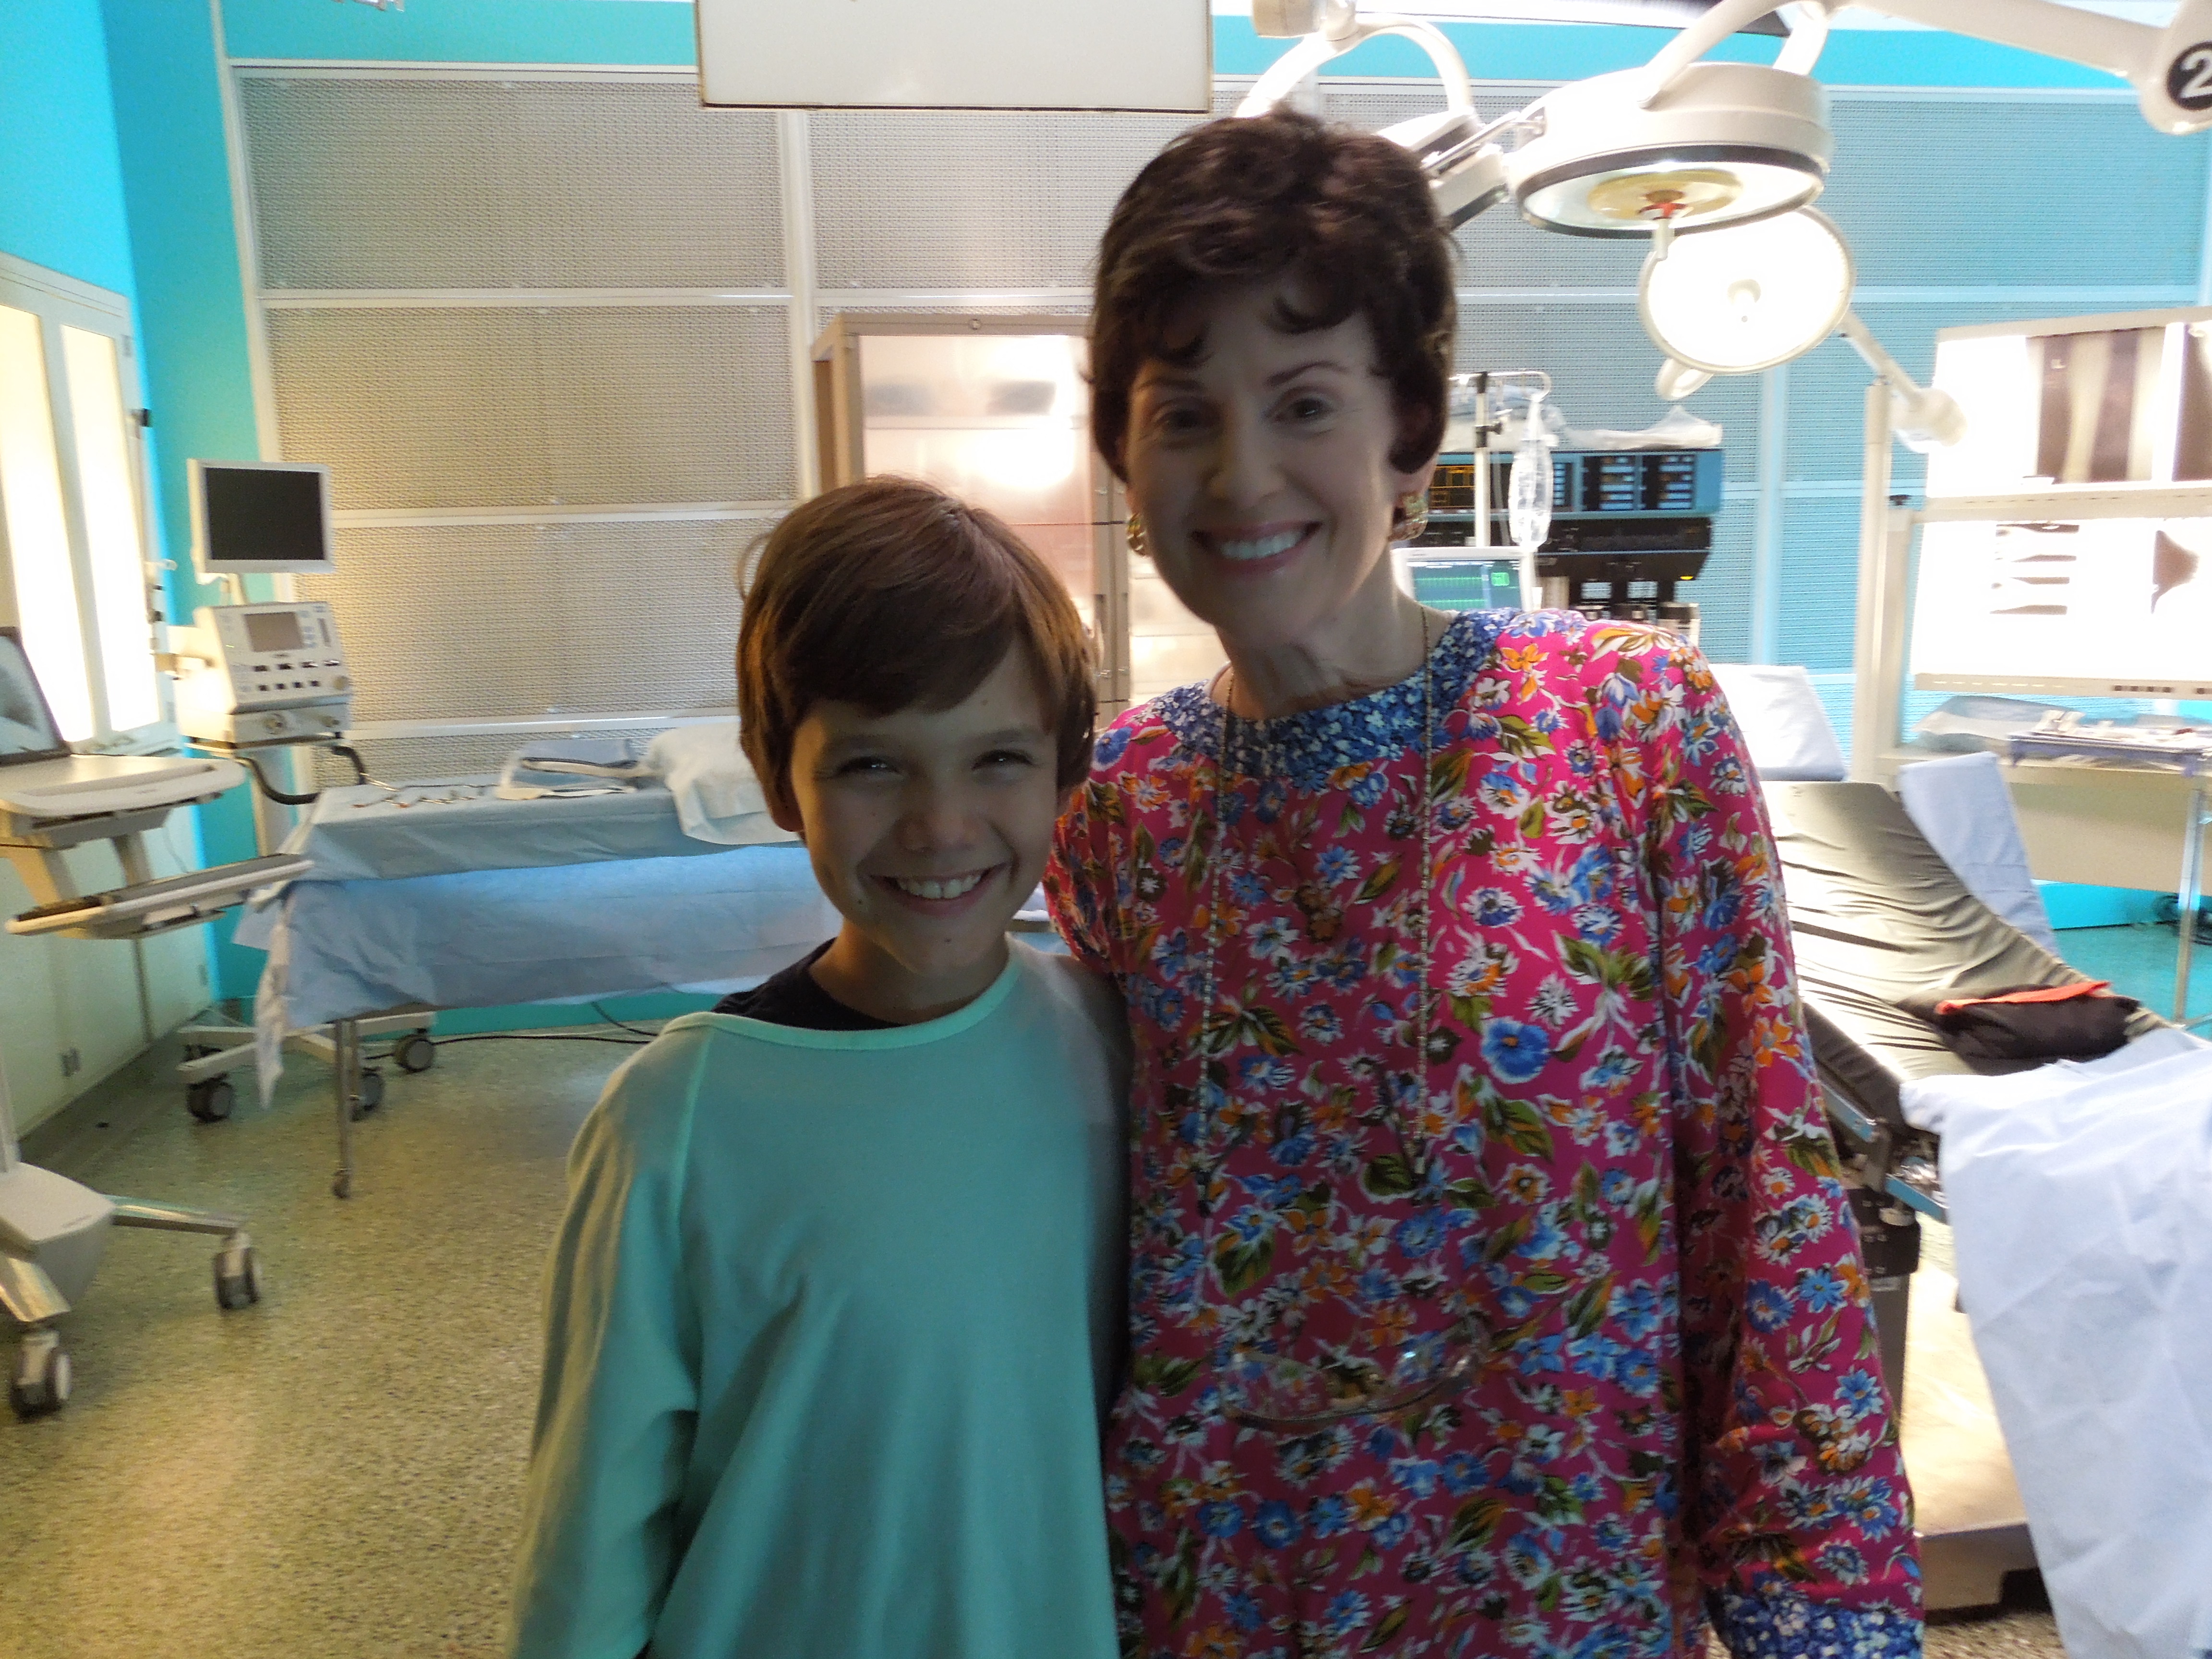 On set of Children's Hospital with Megan Mullally